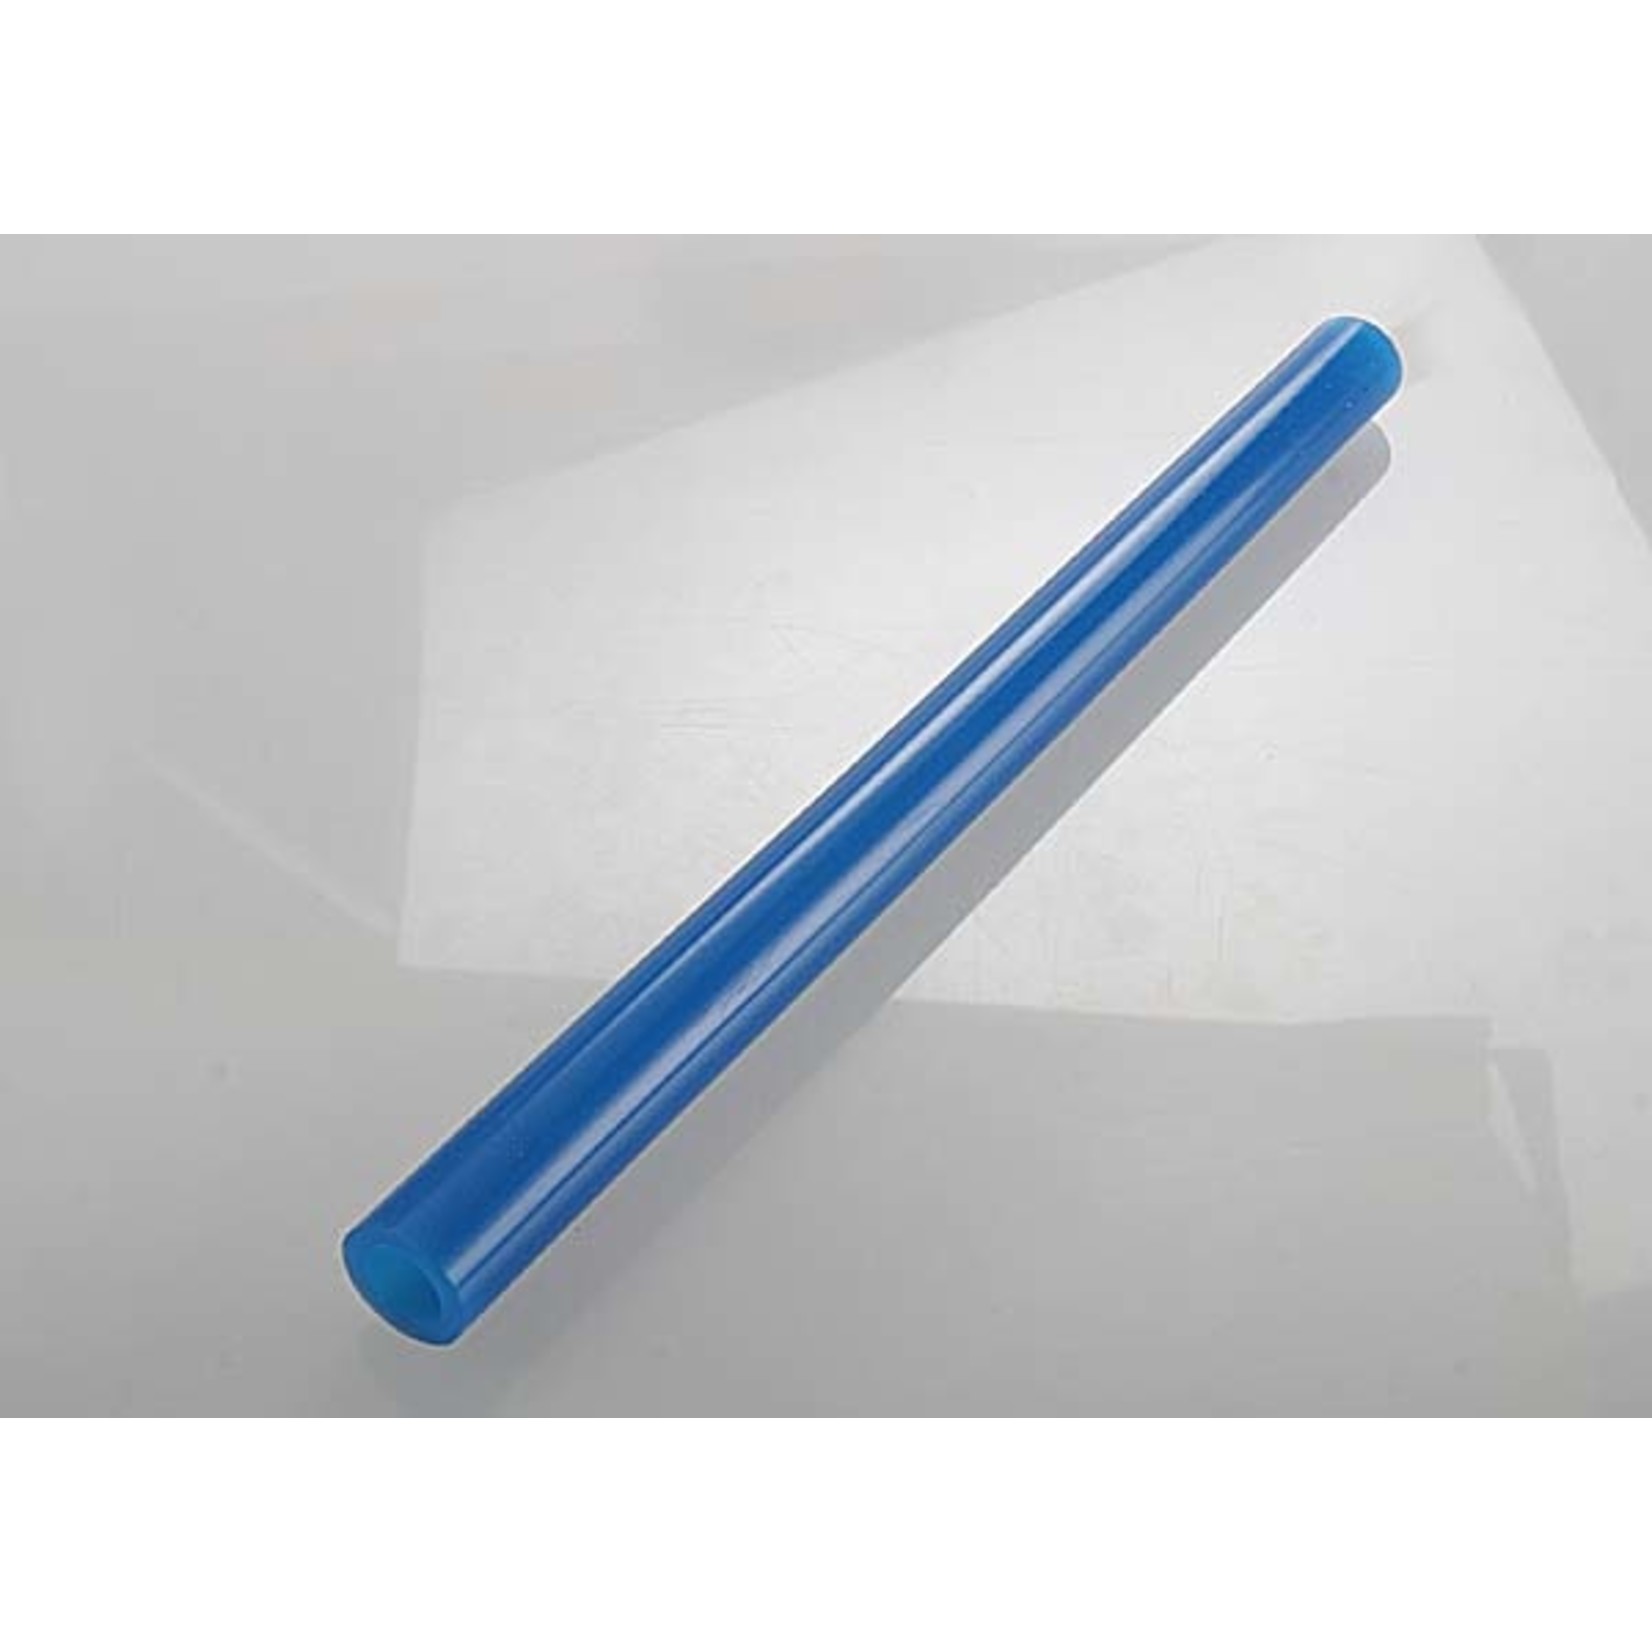 Traxxas 3551A - Exhaust tube, silicone (blue) (N. Stampede